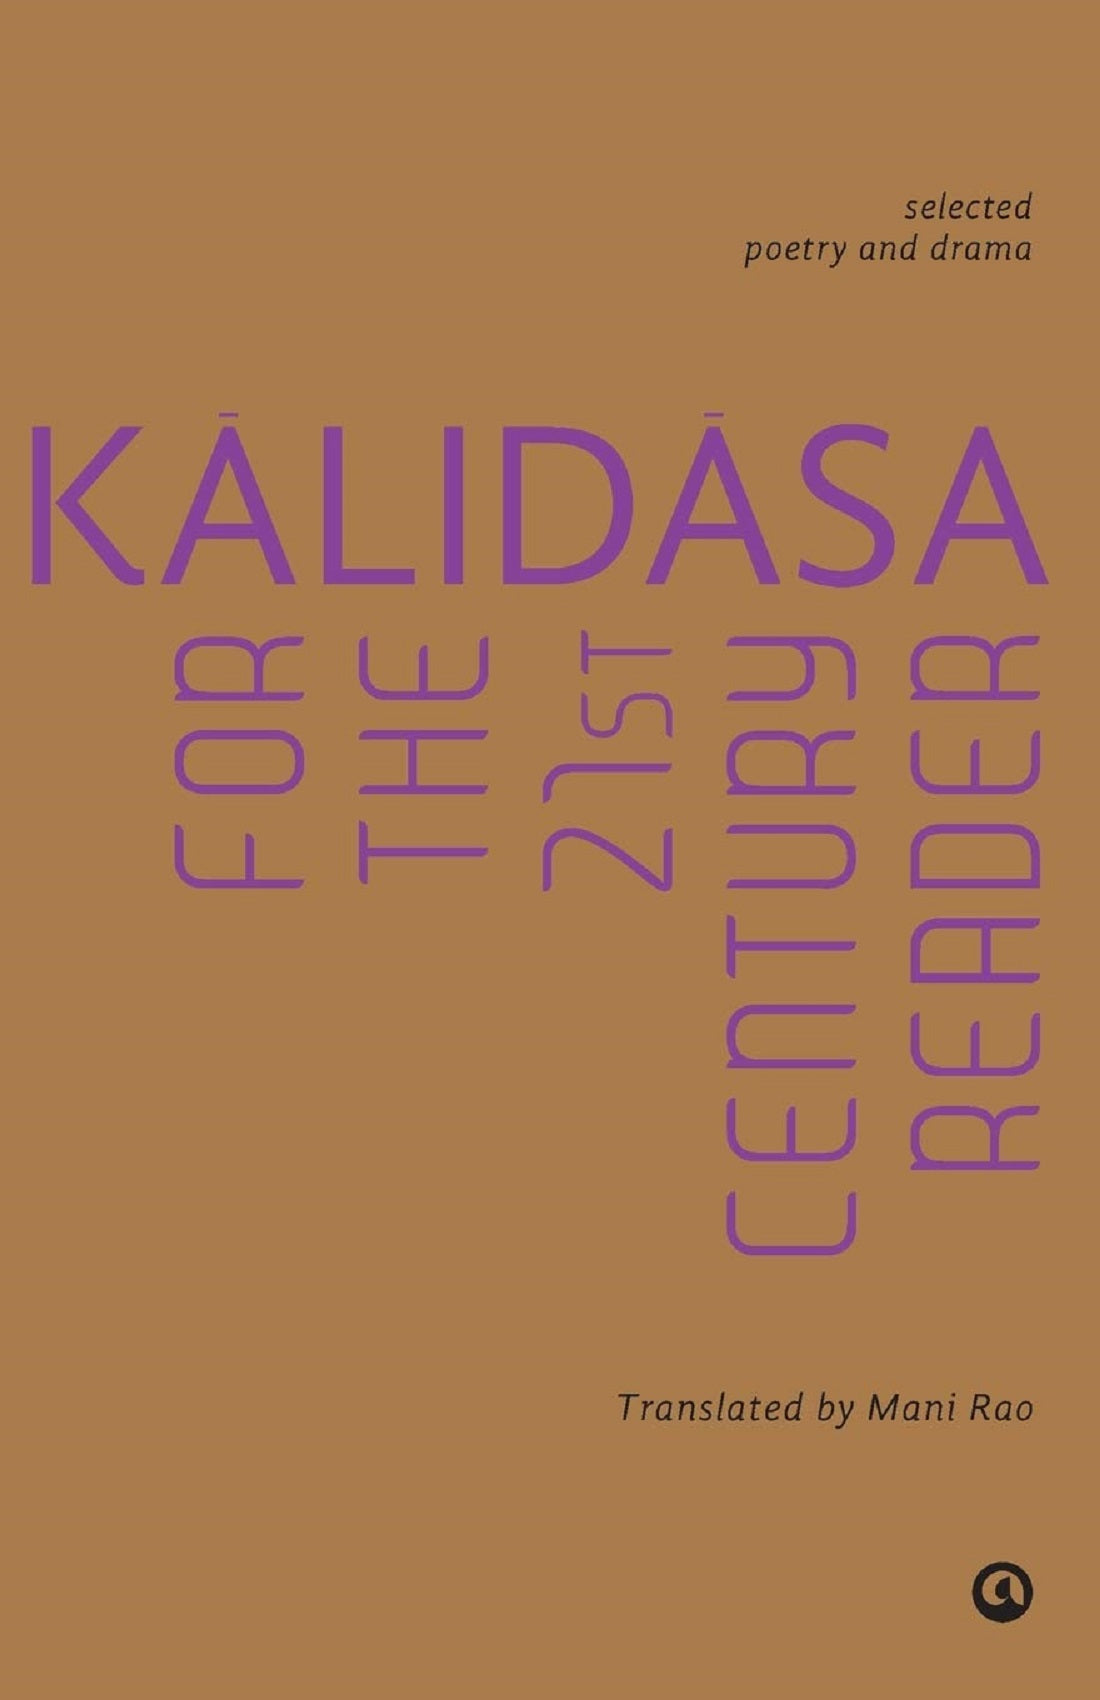 KALIDASA FOR THE 21ST CENTURY READER